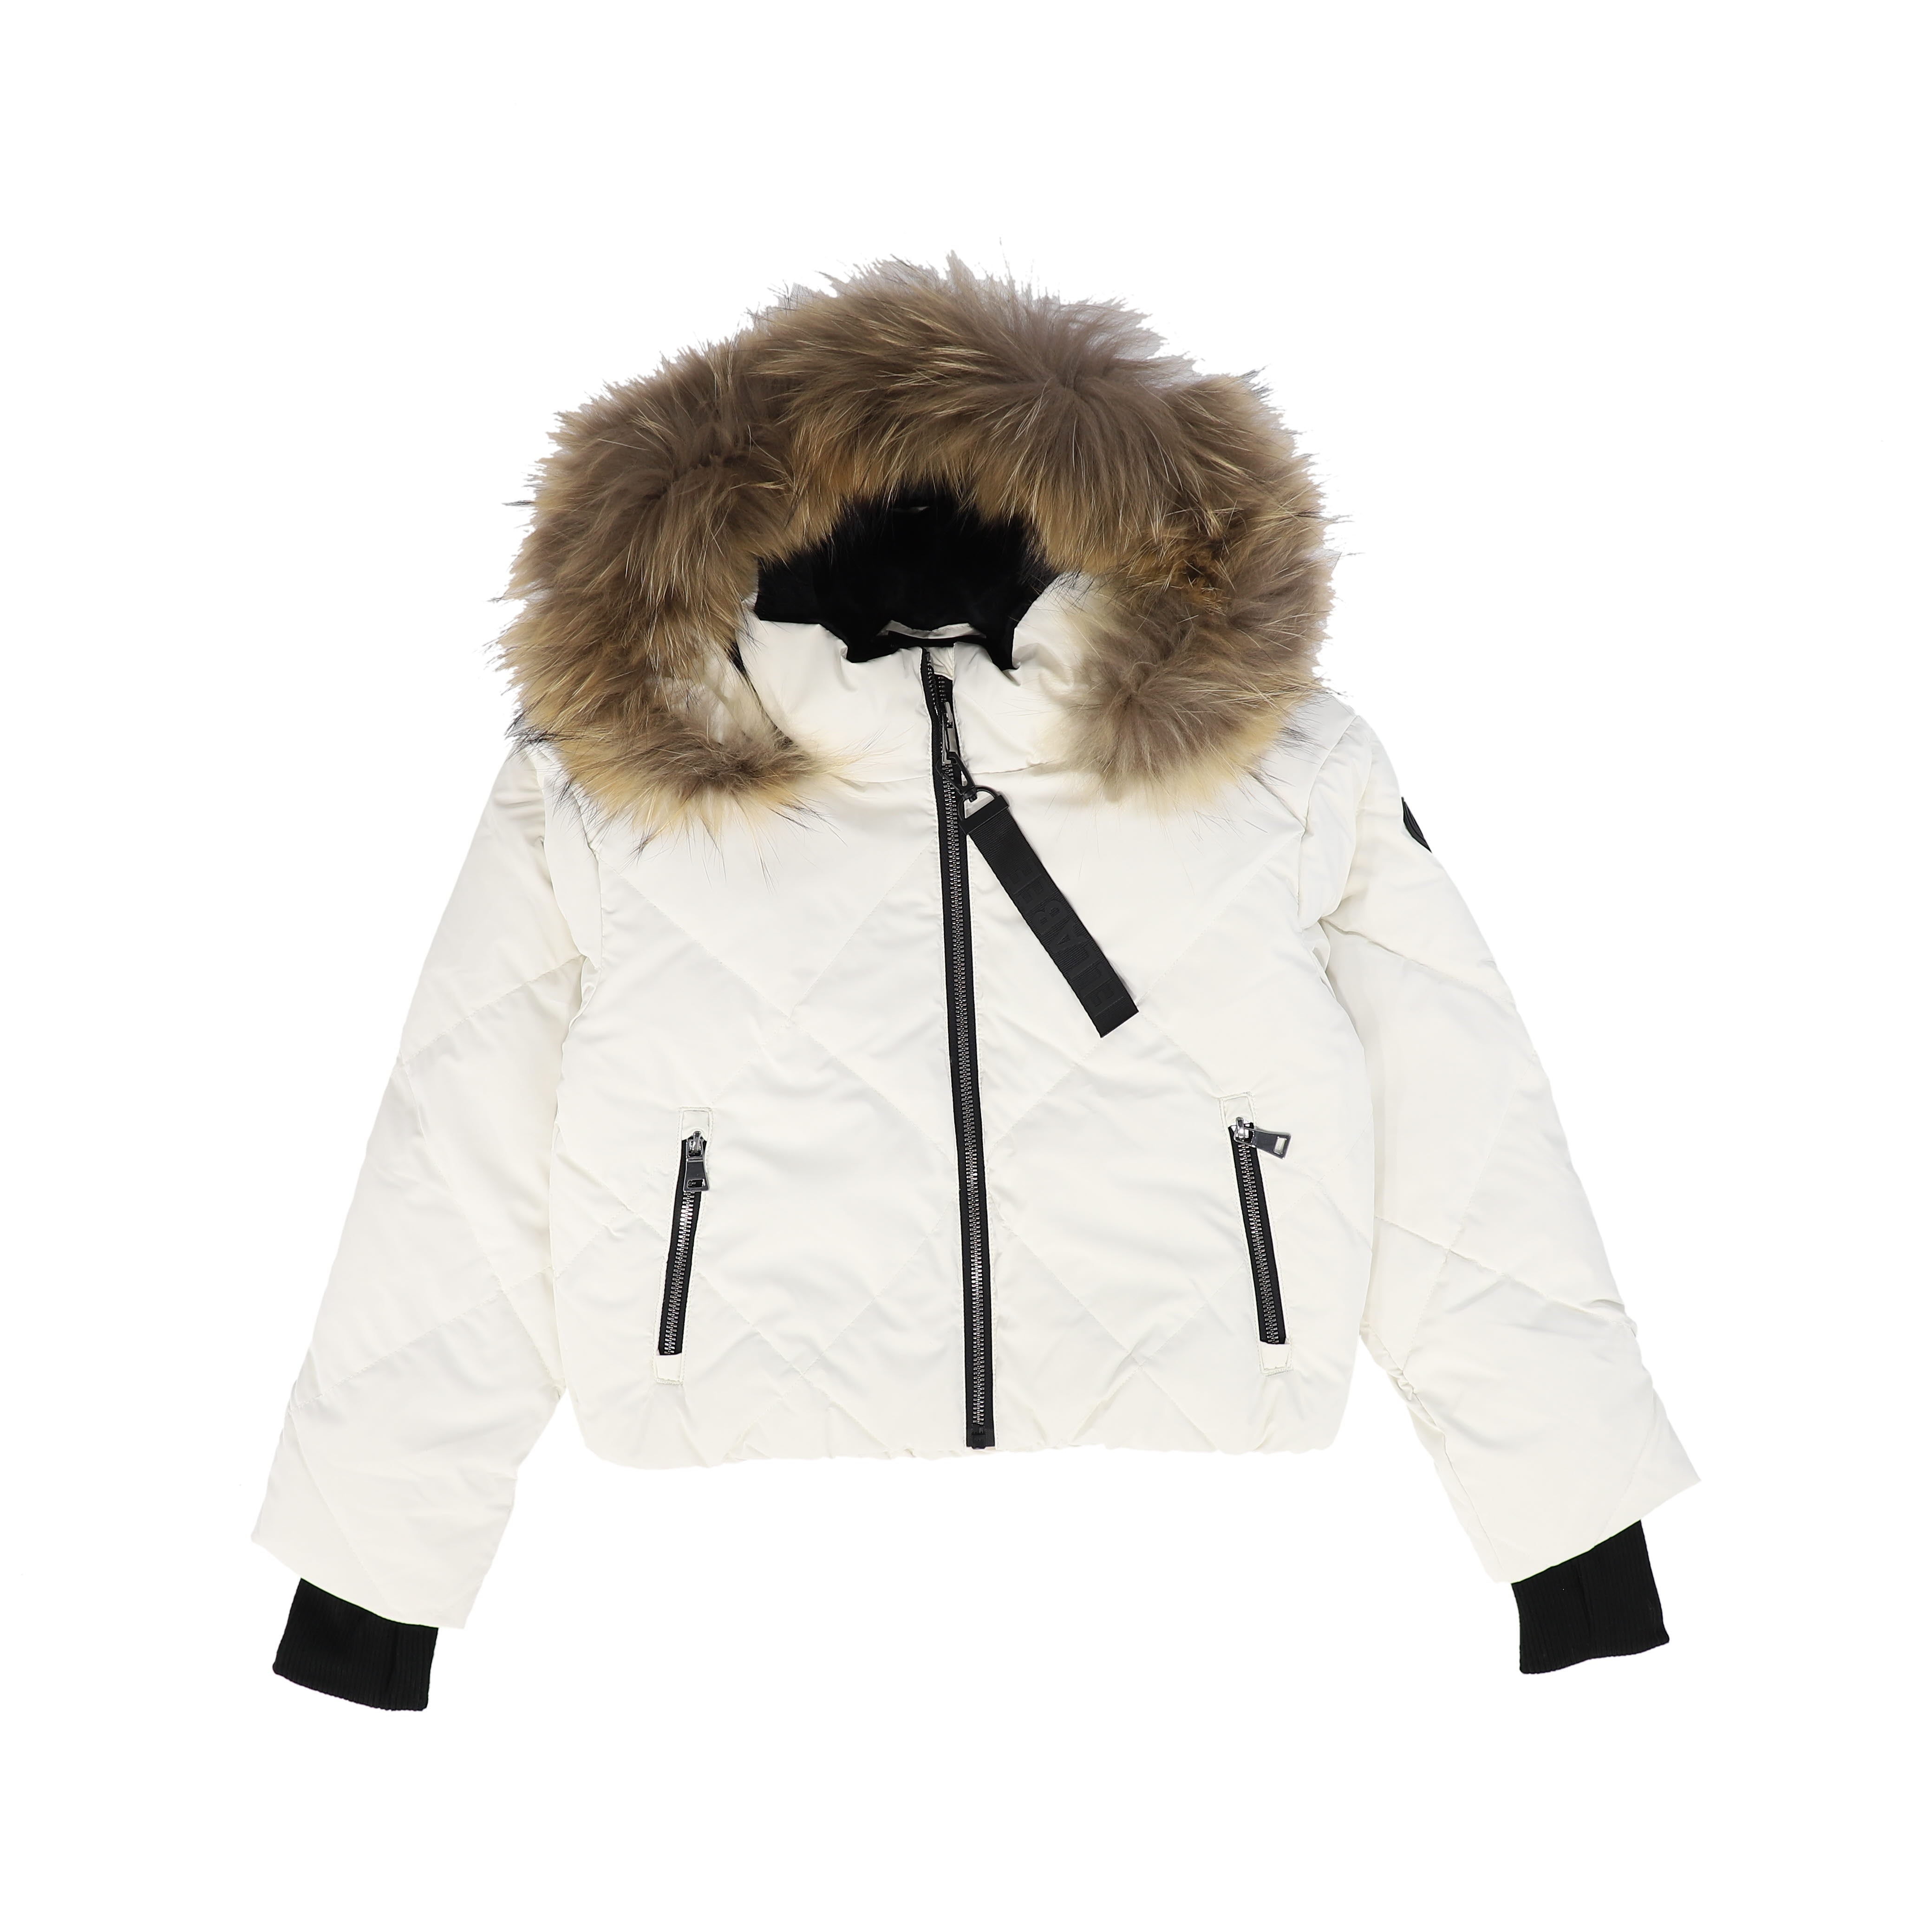 Girls Casual Jackets - Buy Jackets for Girls Online in Saudi Arabia | REDTAG